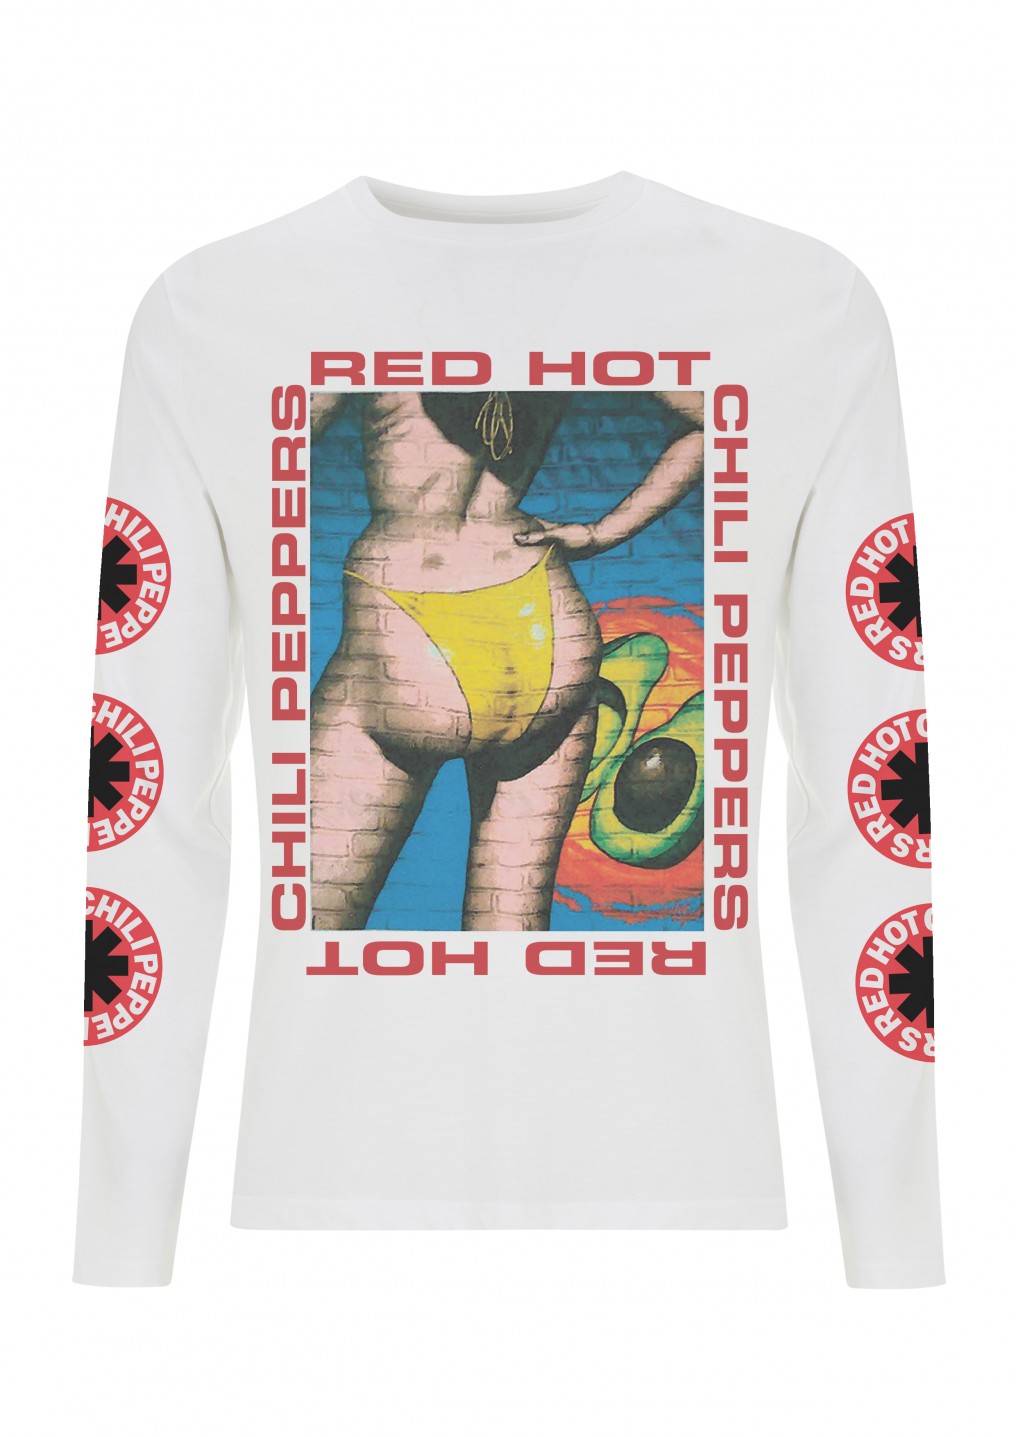 RED HOT CHILI PEPPERS / レッド・ホット・チリ・ペッパーズ / RHCP BIKINI WHITE LONG SLEEVE T (M)